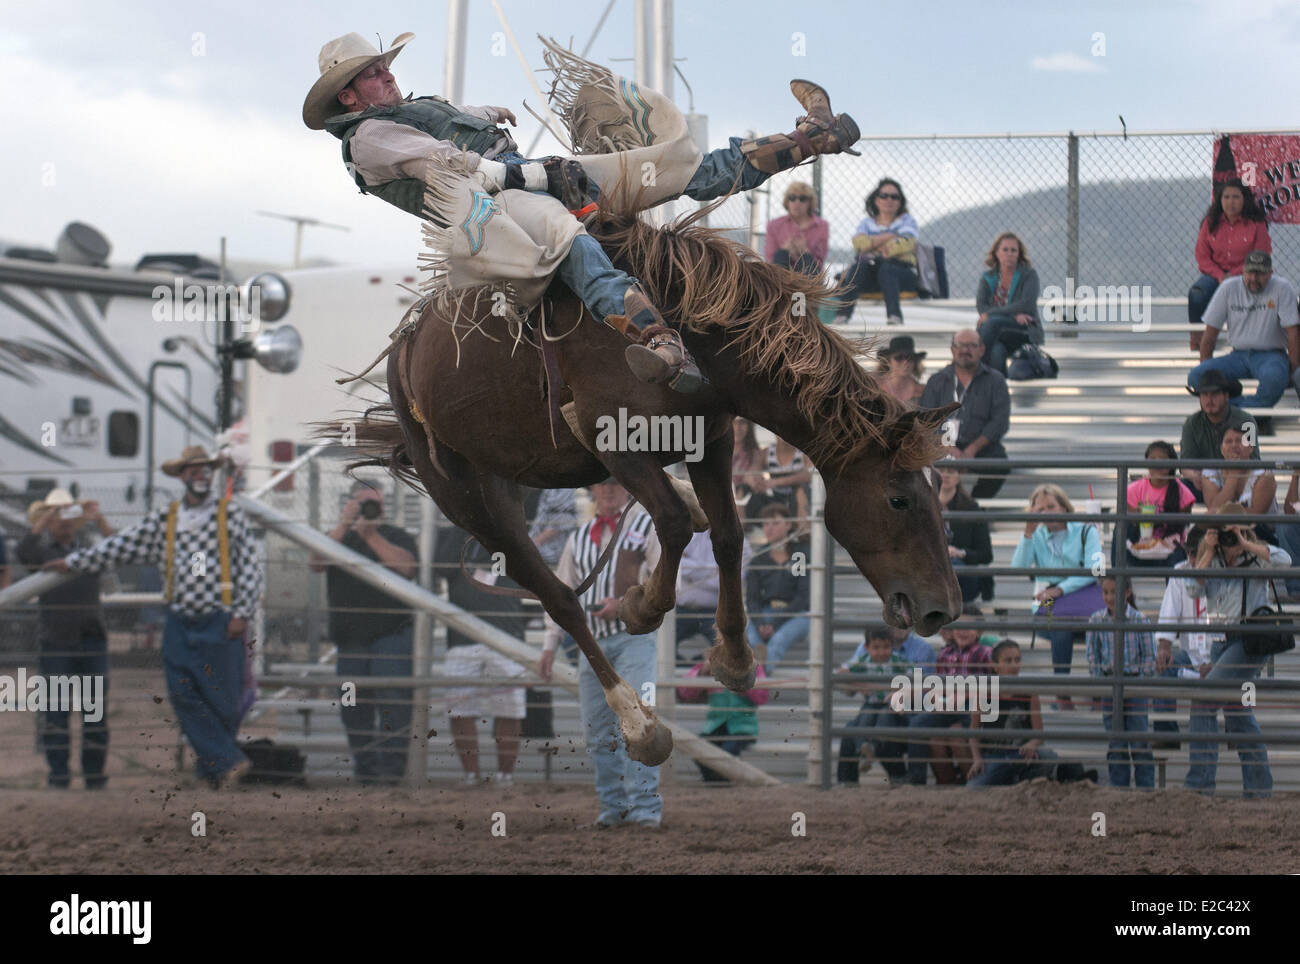 Usa. 18th June, 2014. Jared Green, from Socorro, competes in the bareback riding event on the first night of the Rodeo de Santa Fe, in Santa Fe, Wednesday June 18, 2014. The rodeo is held nightly starting at 5, through Saturday at the Santa fe Rodeo Grounds. Rodeo tickets with parking start at $10 for kids and seniors, $17 for adults. Call 988-1234 or go to www.ticketssantafe.org to get one in advance. © Eddie Moore/Albuquerque Journal/ZUMAPRESS.com/Alamy Live News Stock Photo